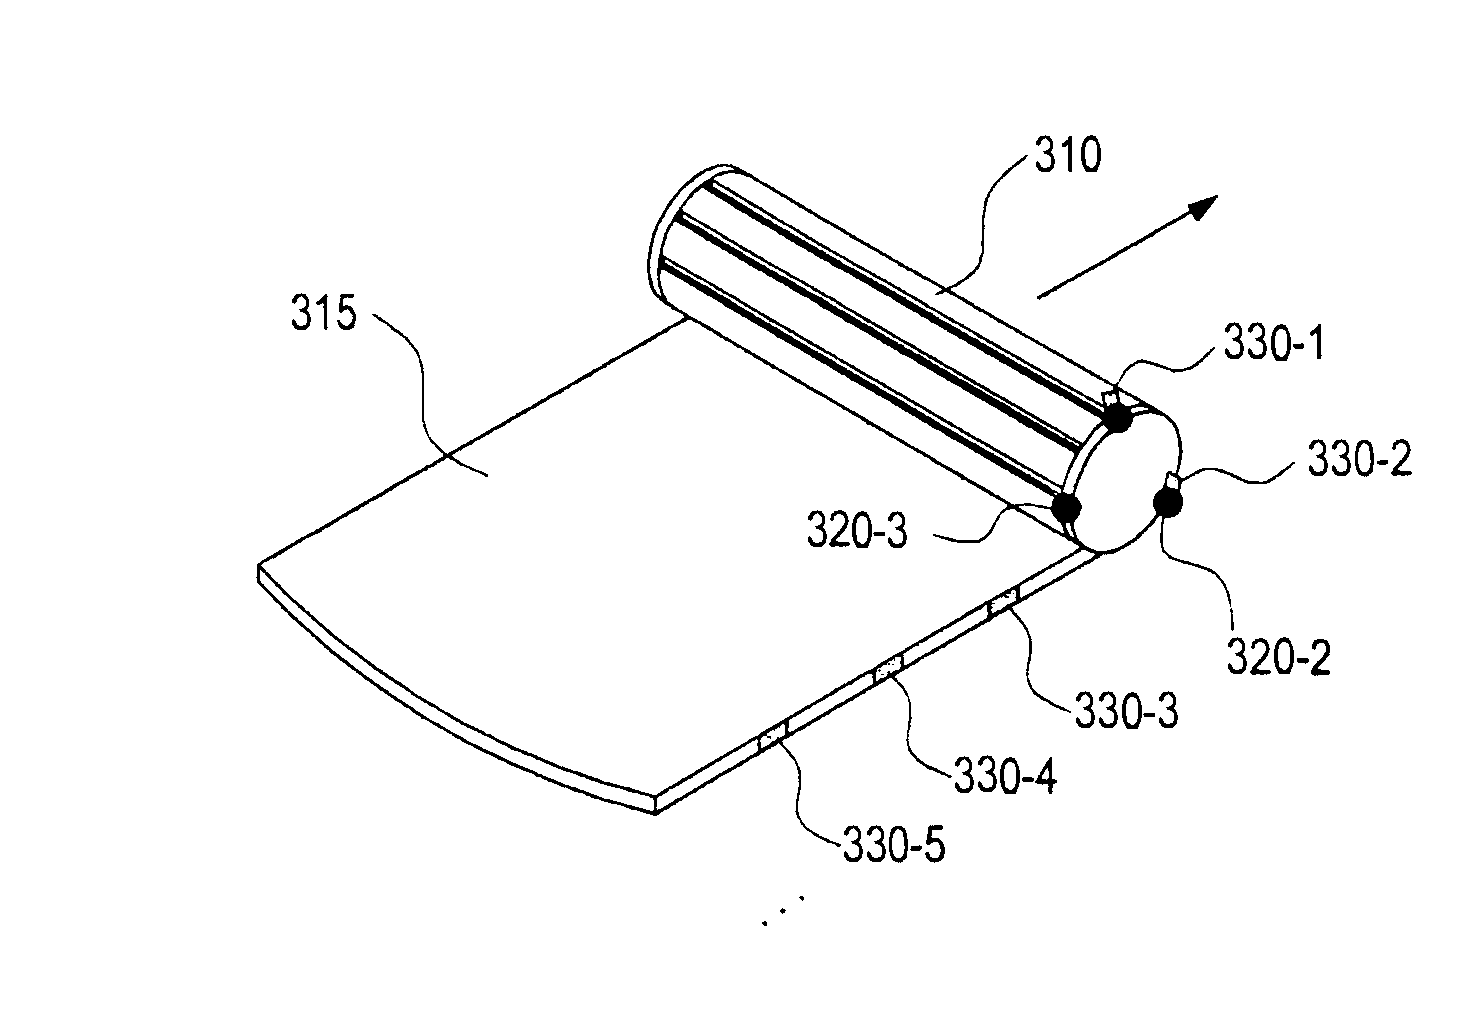 Display apparatus and method for portable terminal